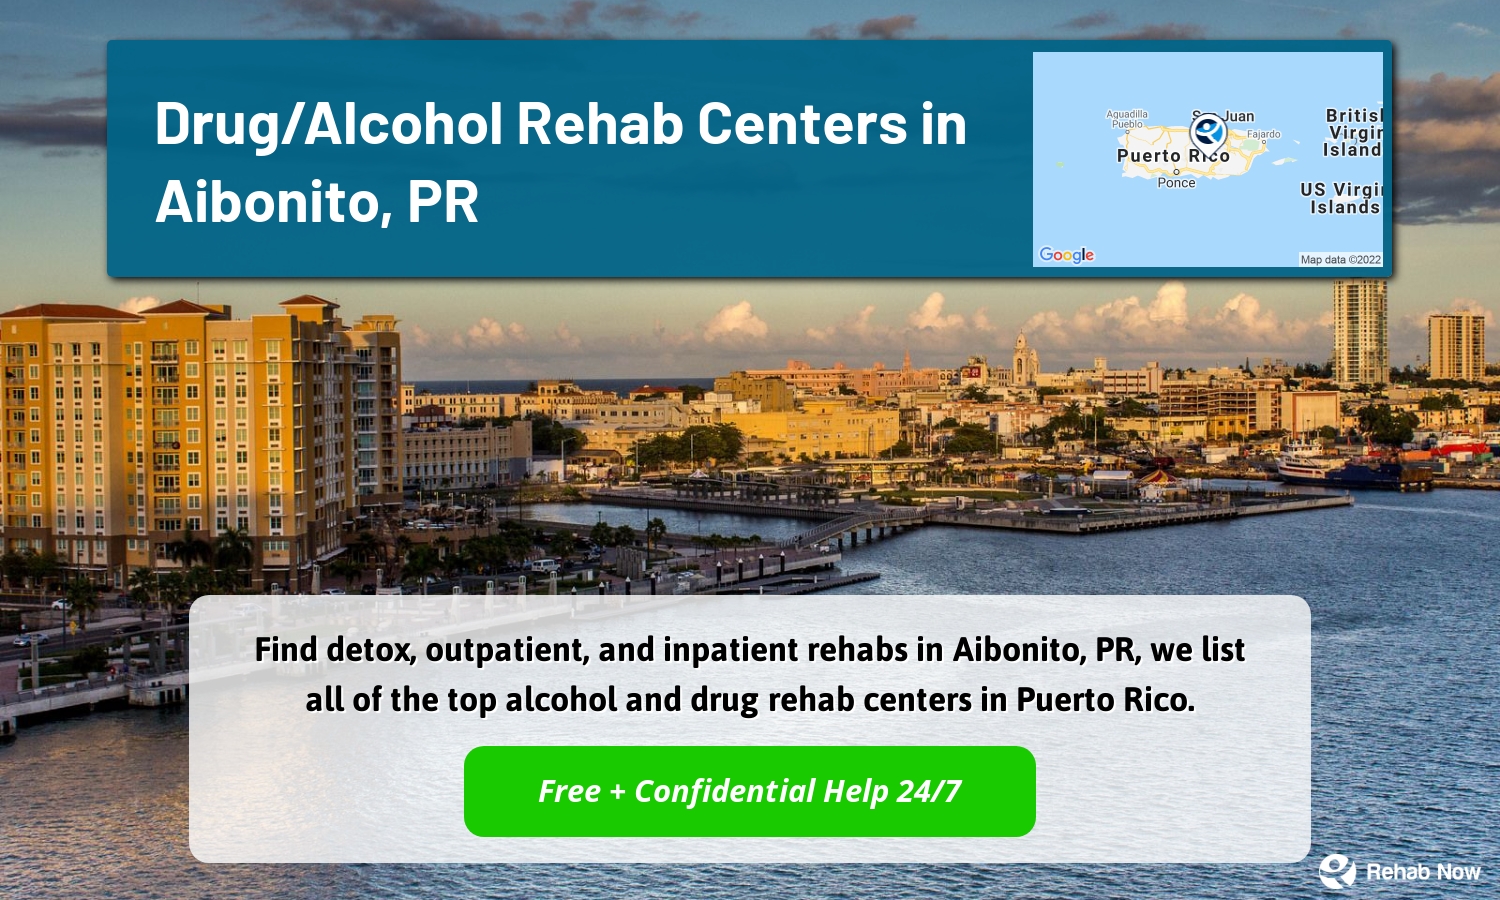 Find detox, outpatient, and inpatient rehabs in Aibonito, PR, we list all of the top alcohol and drug rehab centers in Puerto Rico.